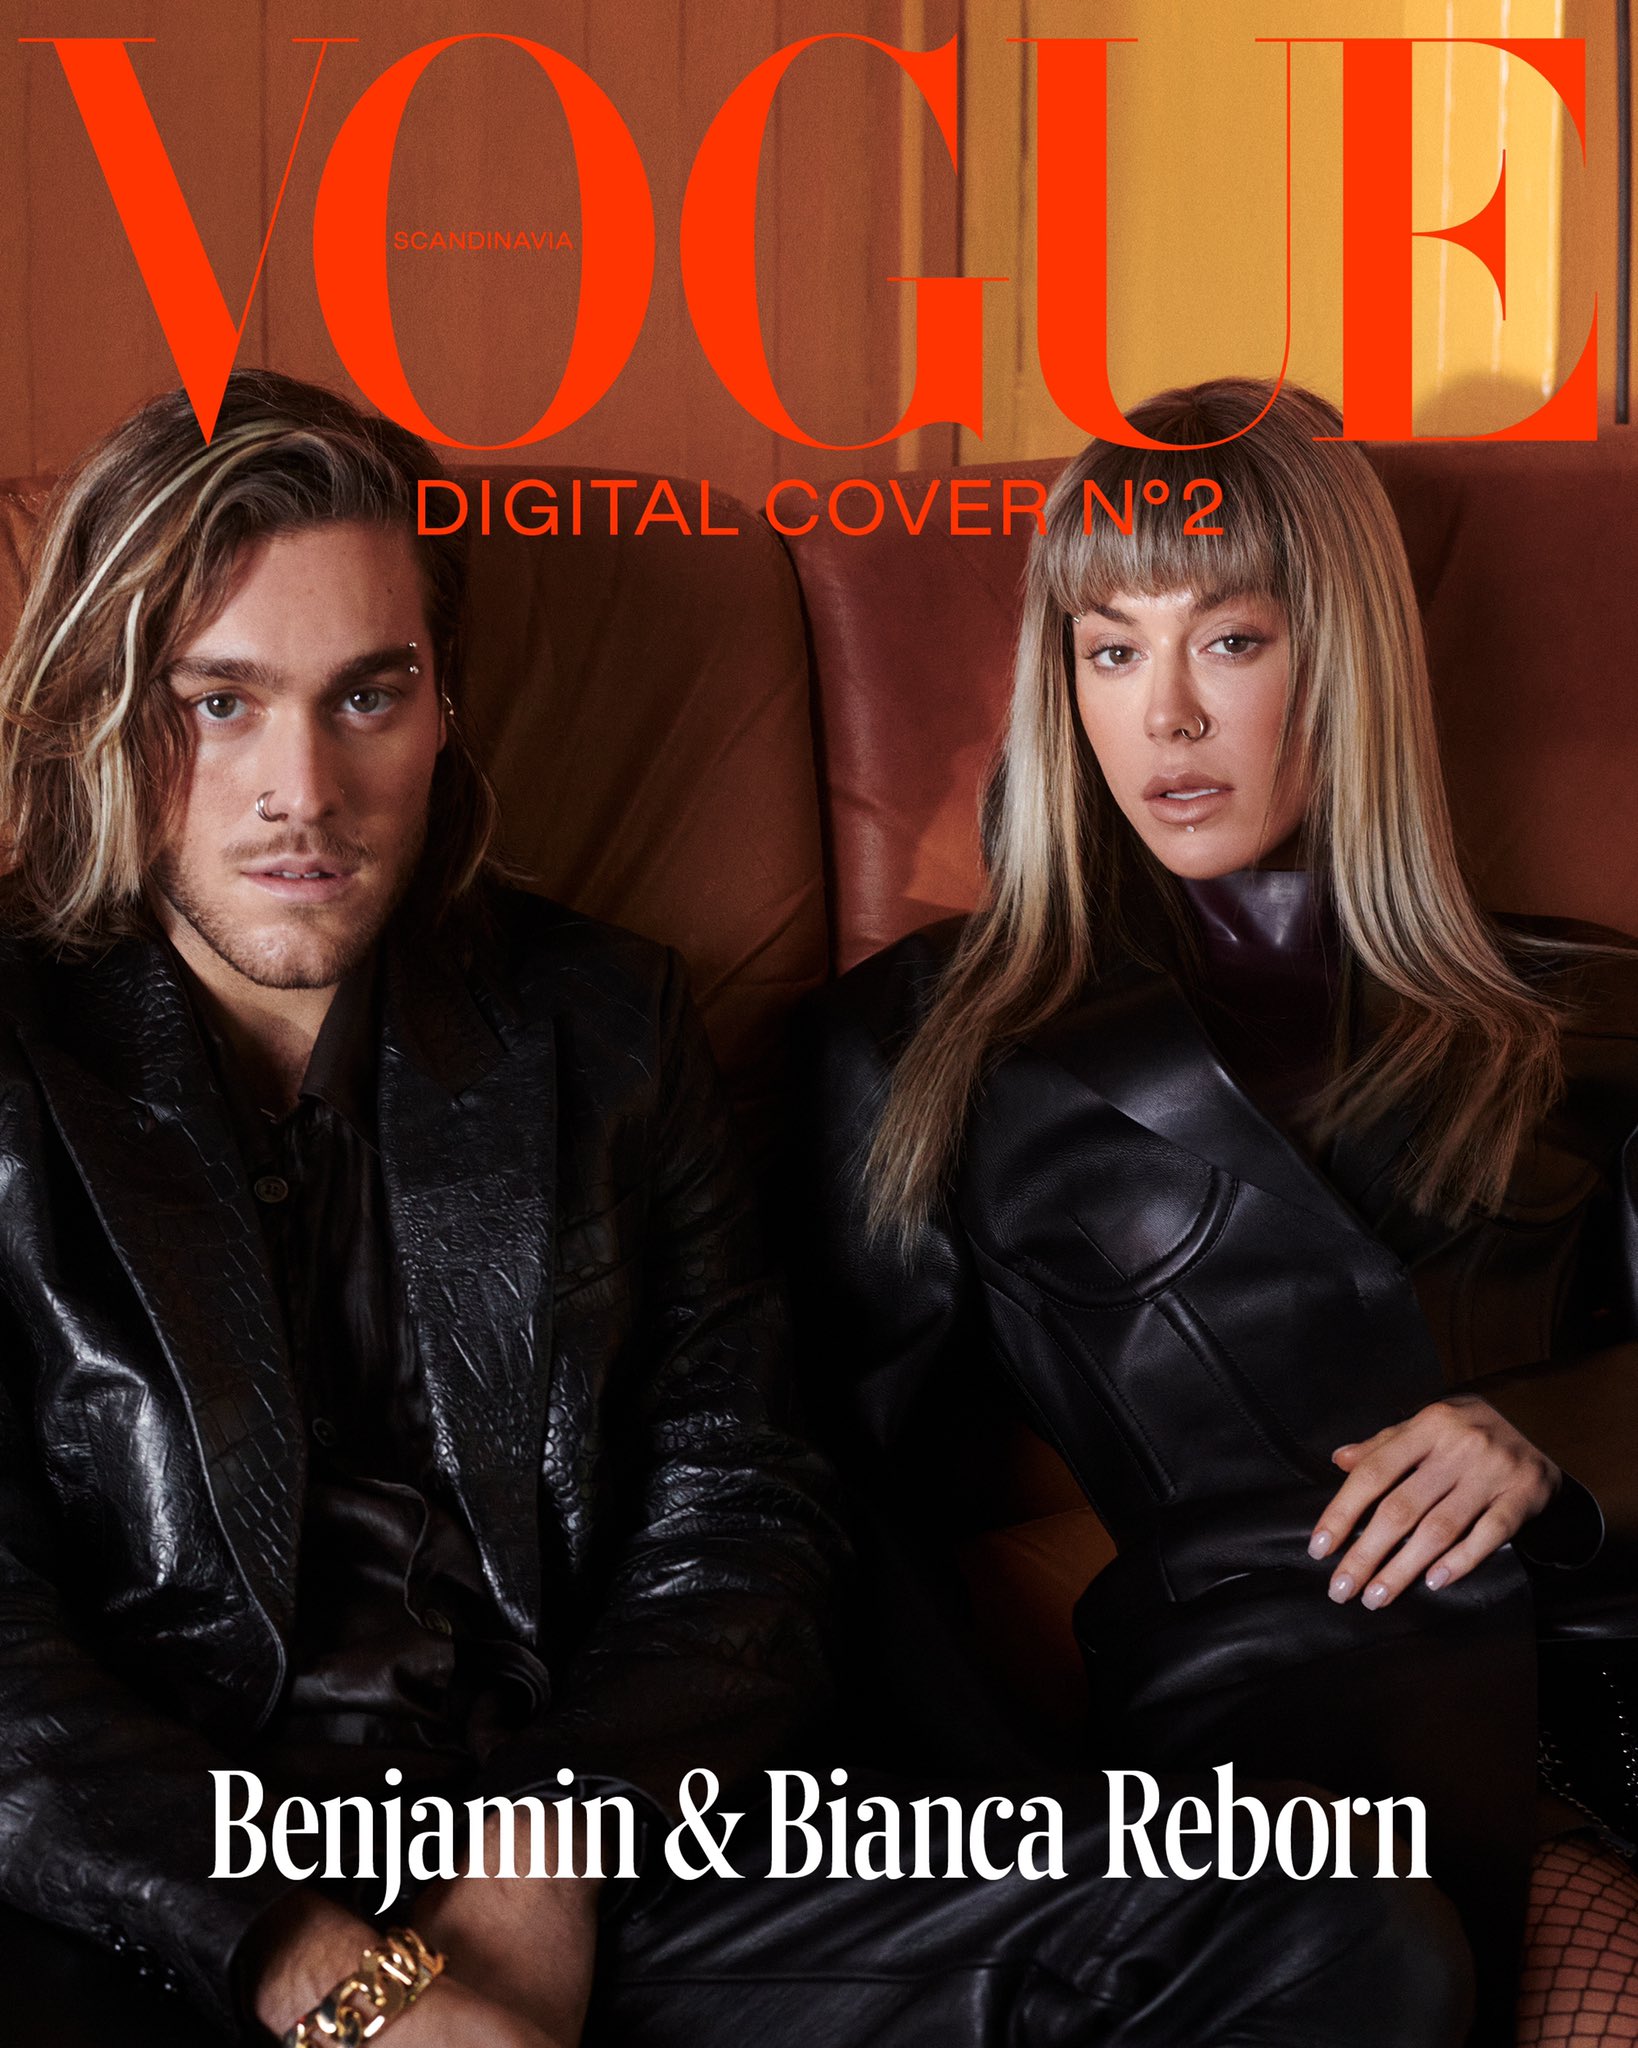 Vogue Scandinavia on X: “He's my person and I'm his person.” They may be  two of Sweden's most recognisable faces, but Vogue Scandinavia's latest  digital cover presents Benjamin and Bianca Ingrosso as